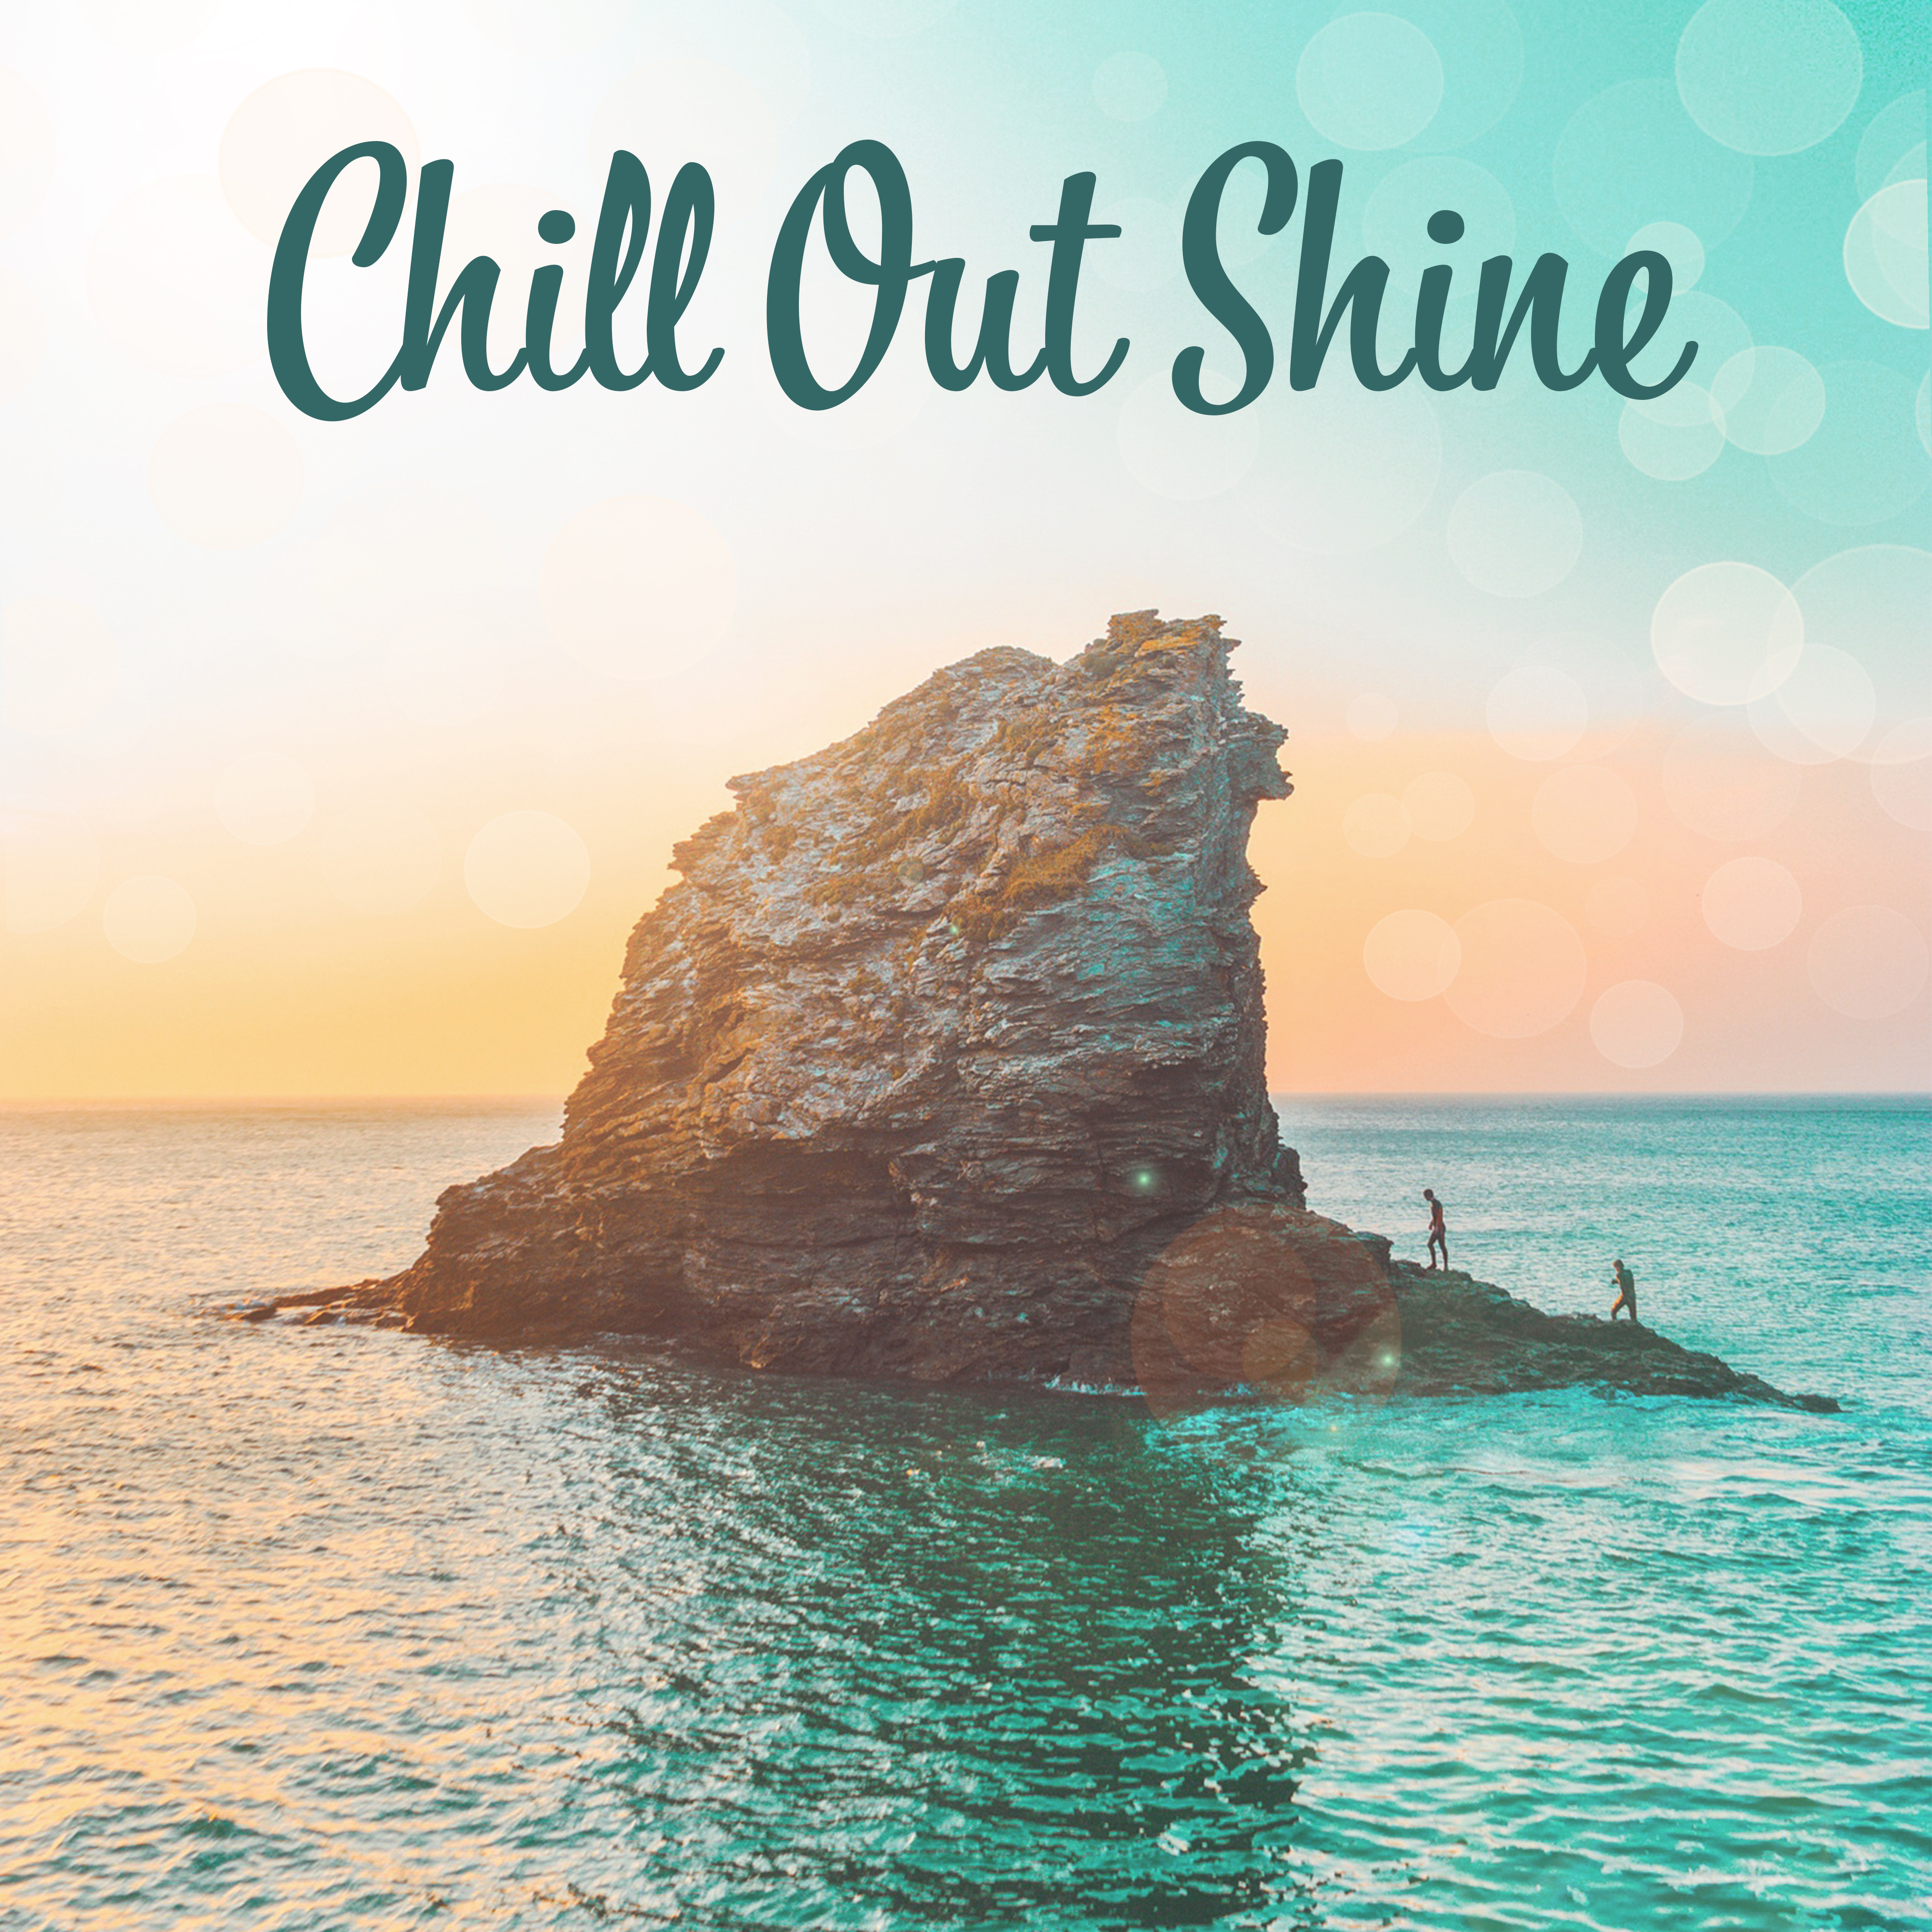 Chill Out Shine  Ultimate Chill Out 2017, Summer Lounge, Chillout 04 Ever, Relax